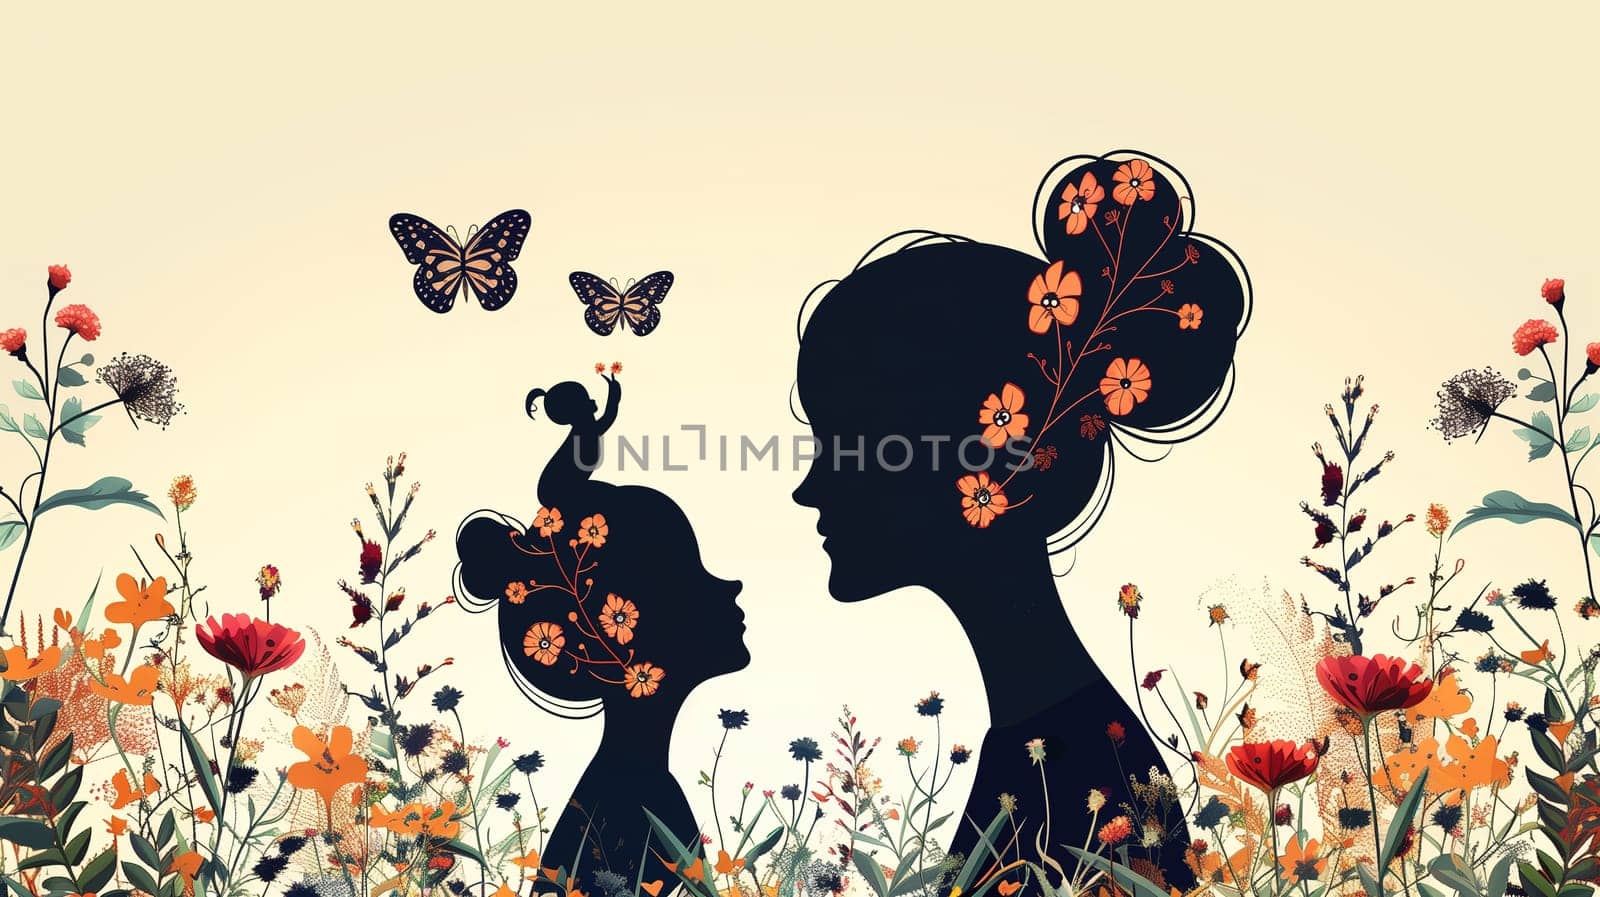 A Woman and a Child Walking in a Field of Flowers by TRMK